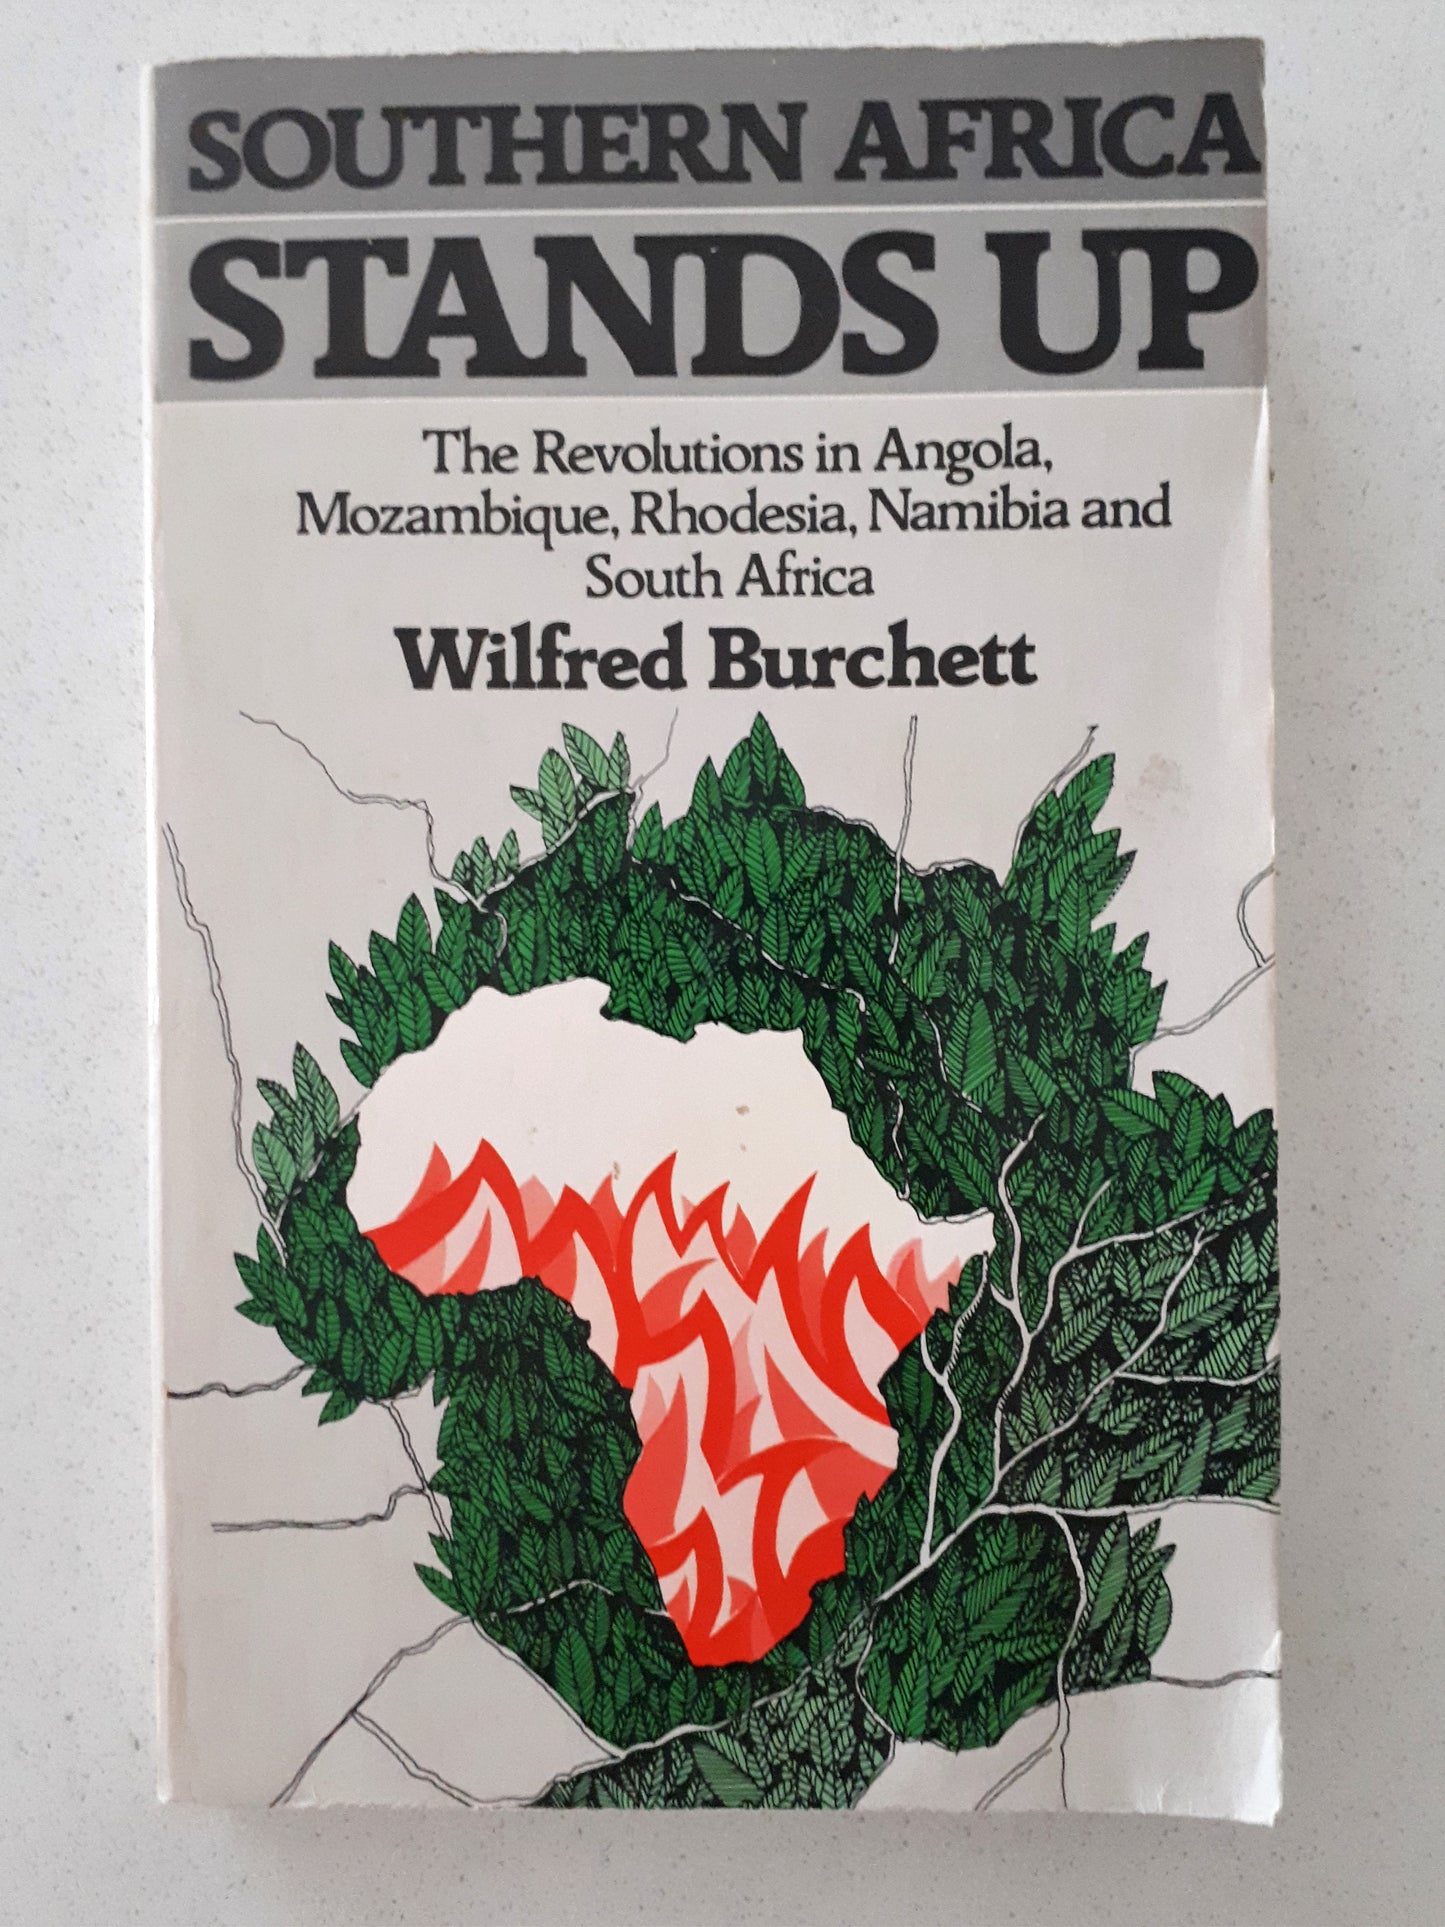 Southern Africa Stands Up by Wilfred Burchett